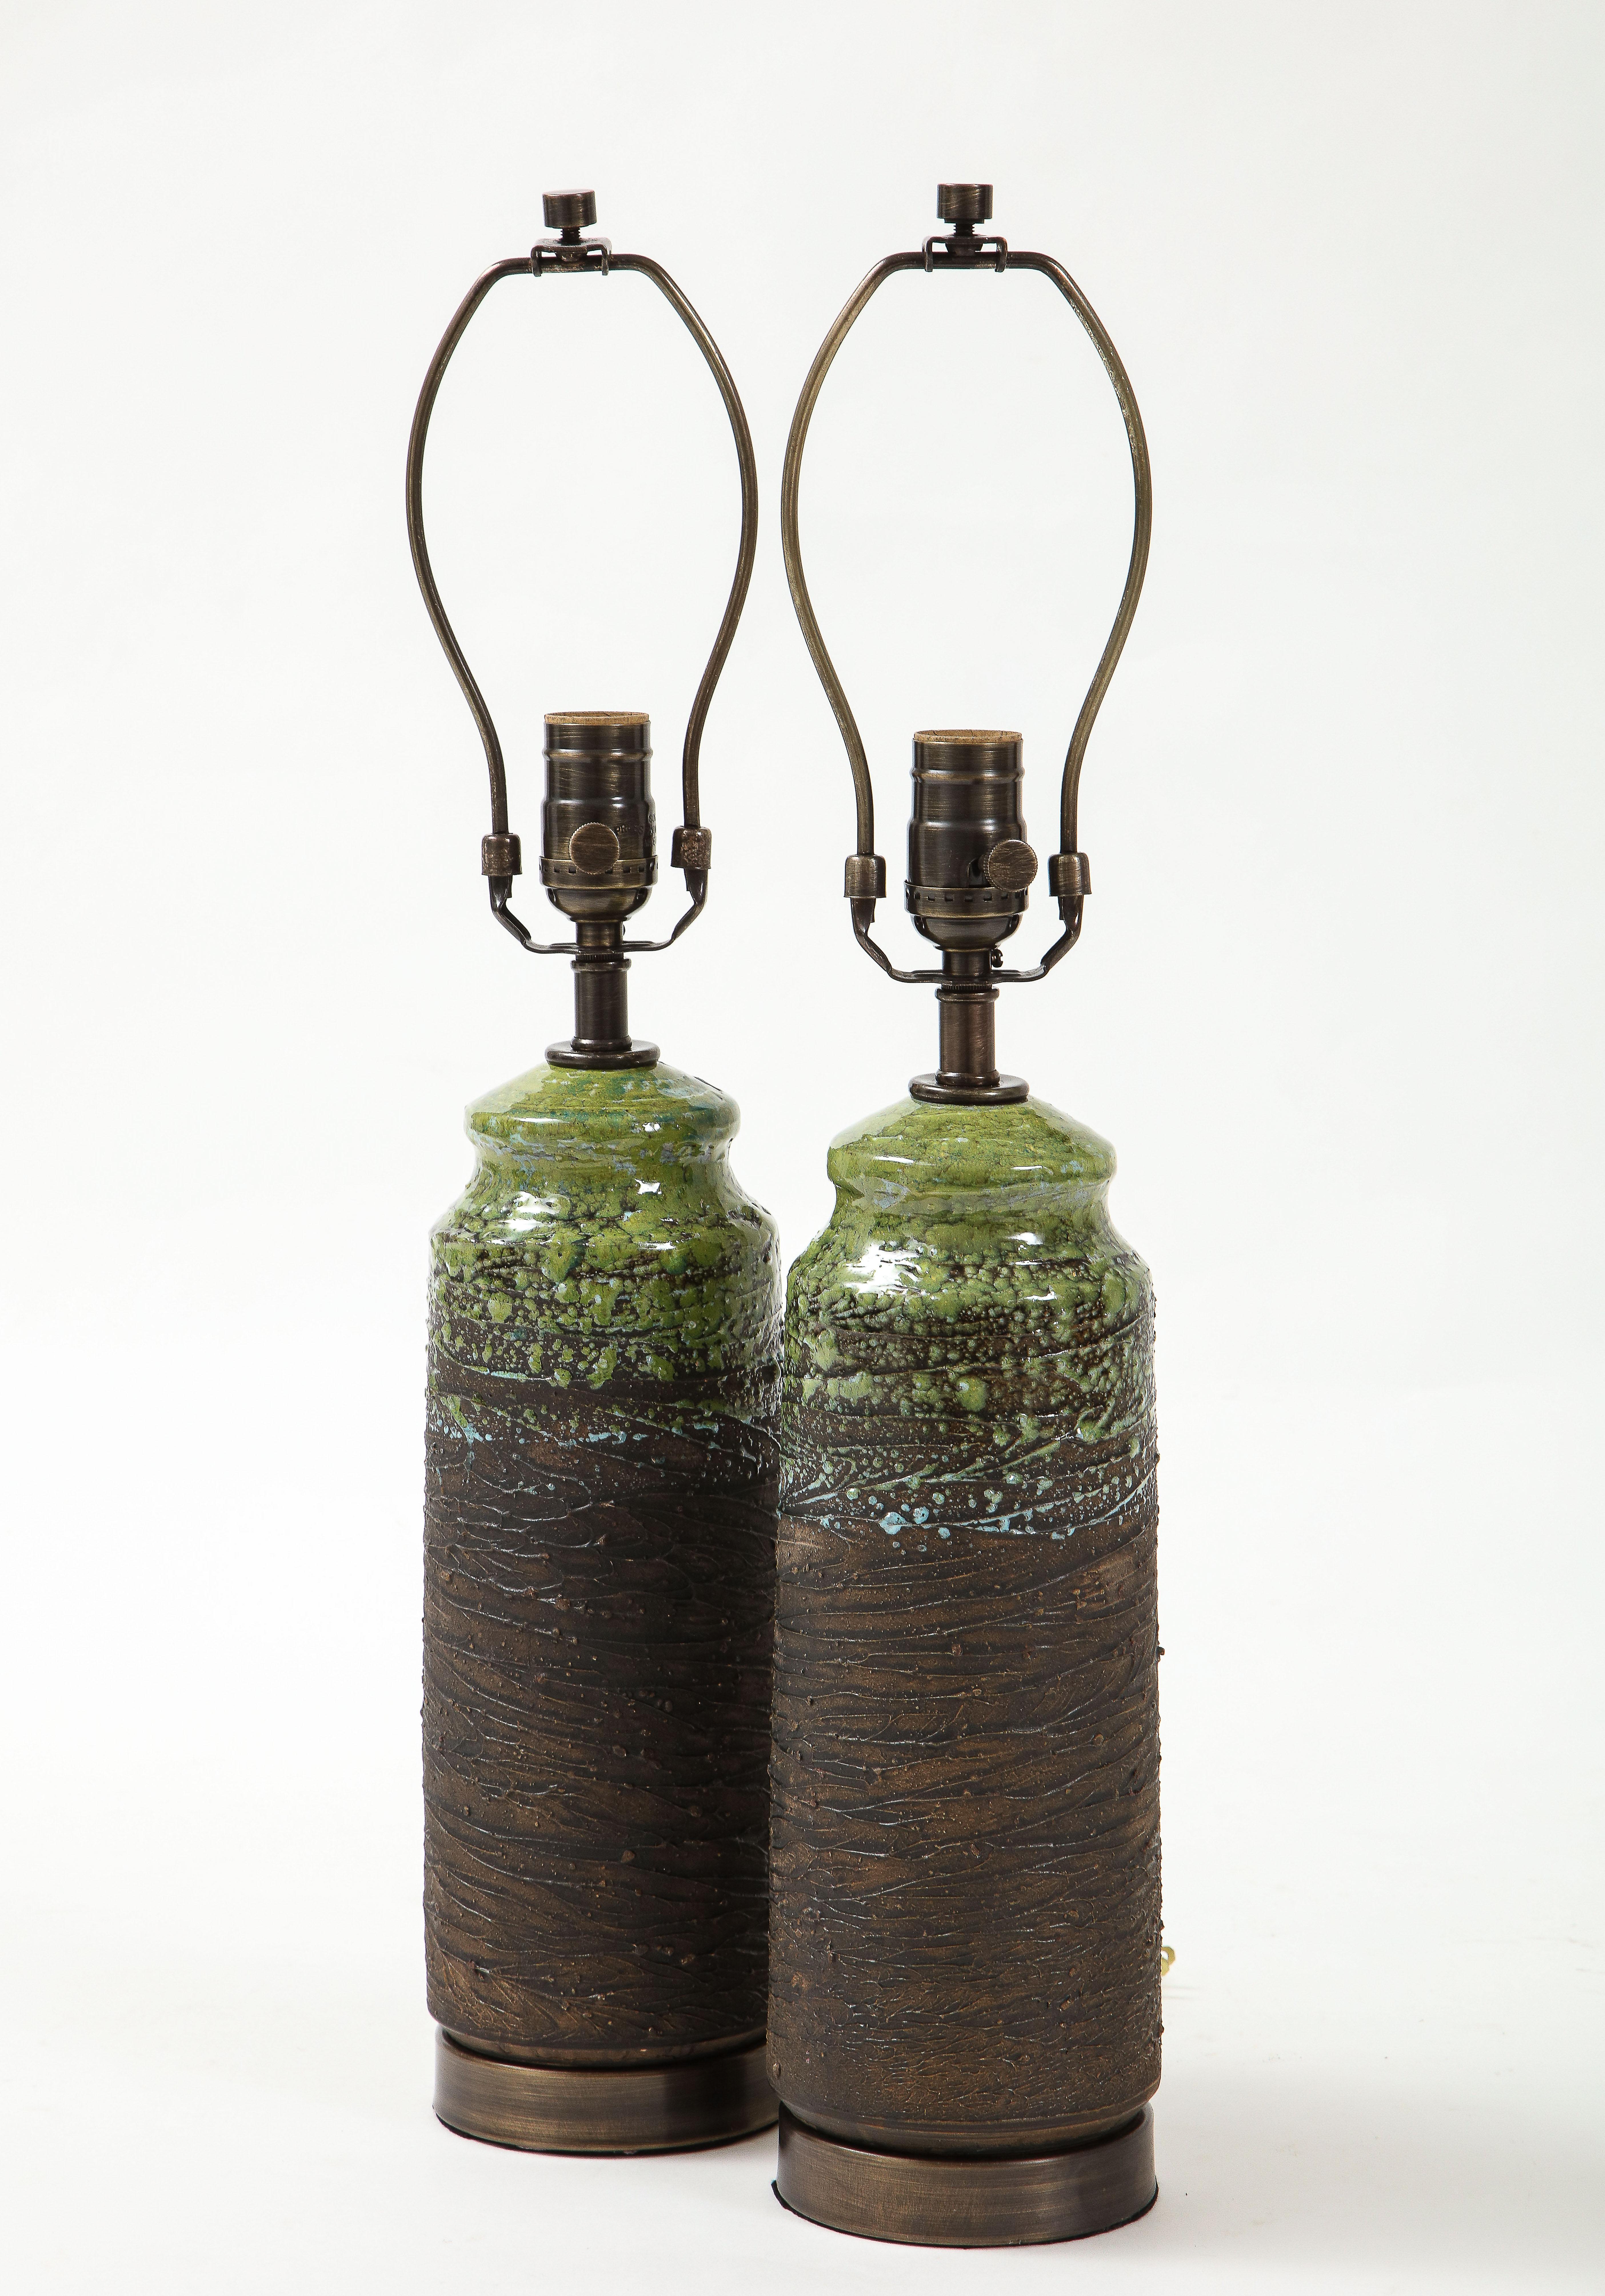 Pair of Swedish modern ceramic lamps with bark brown glazed bodies contrasted by a moss green top and a hint of ice blue. Lamps sit on dark bronze bases and have bronze fittings. Rewired to USA standards, 100W max.